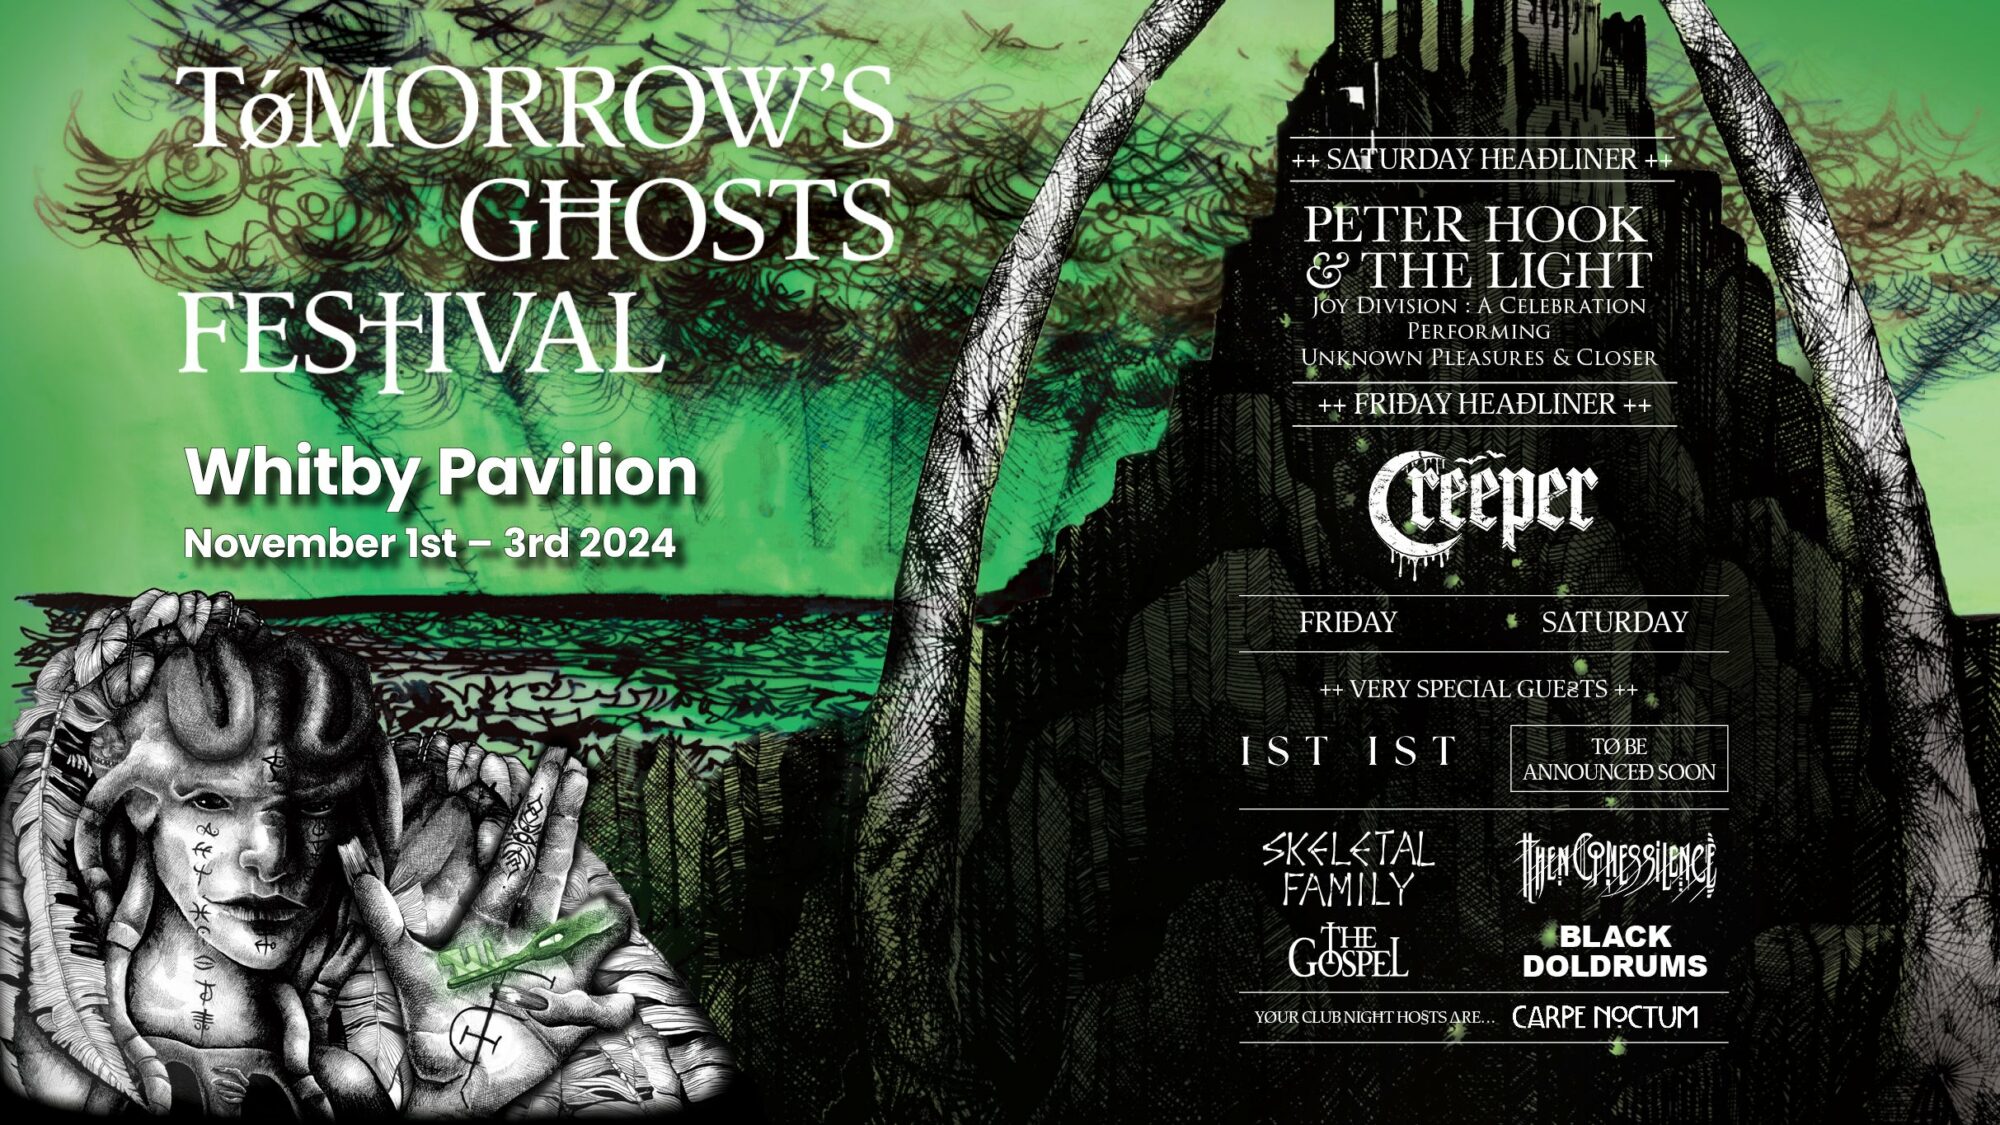 Image name Tomorrows Ghosts Festival Friday Night Ticket at Whitby Pavilion Northern Lights Suite Whitby the 10 image from the post Tomorrows Ghosts Festival Saturday Night Ticket at Whitby Pavilion Northern Lights Suite, Whitby in Yorkshire.com.